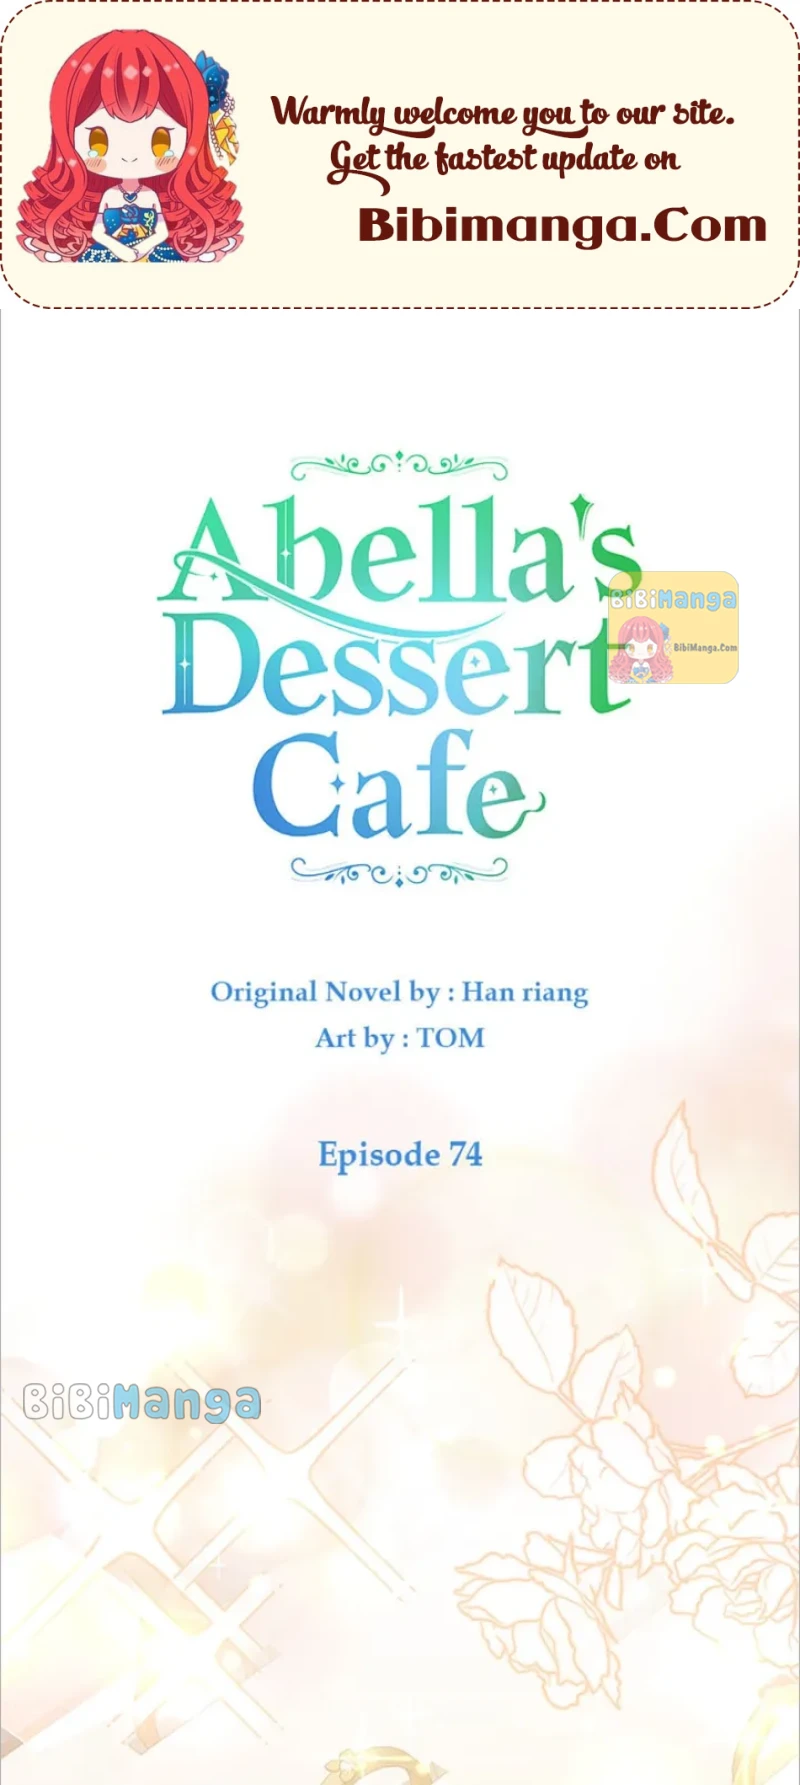 She came back and opened a dessert shop chapter 74